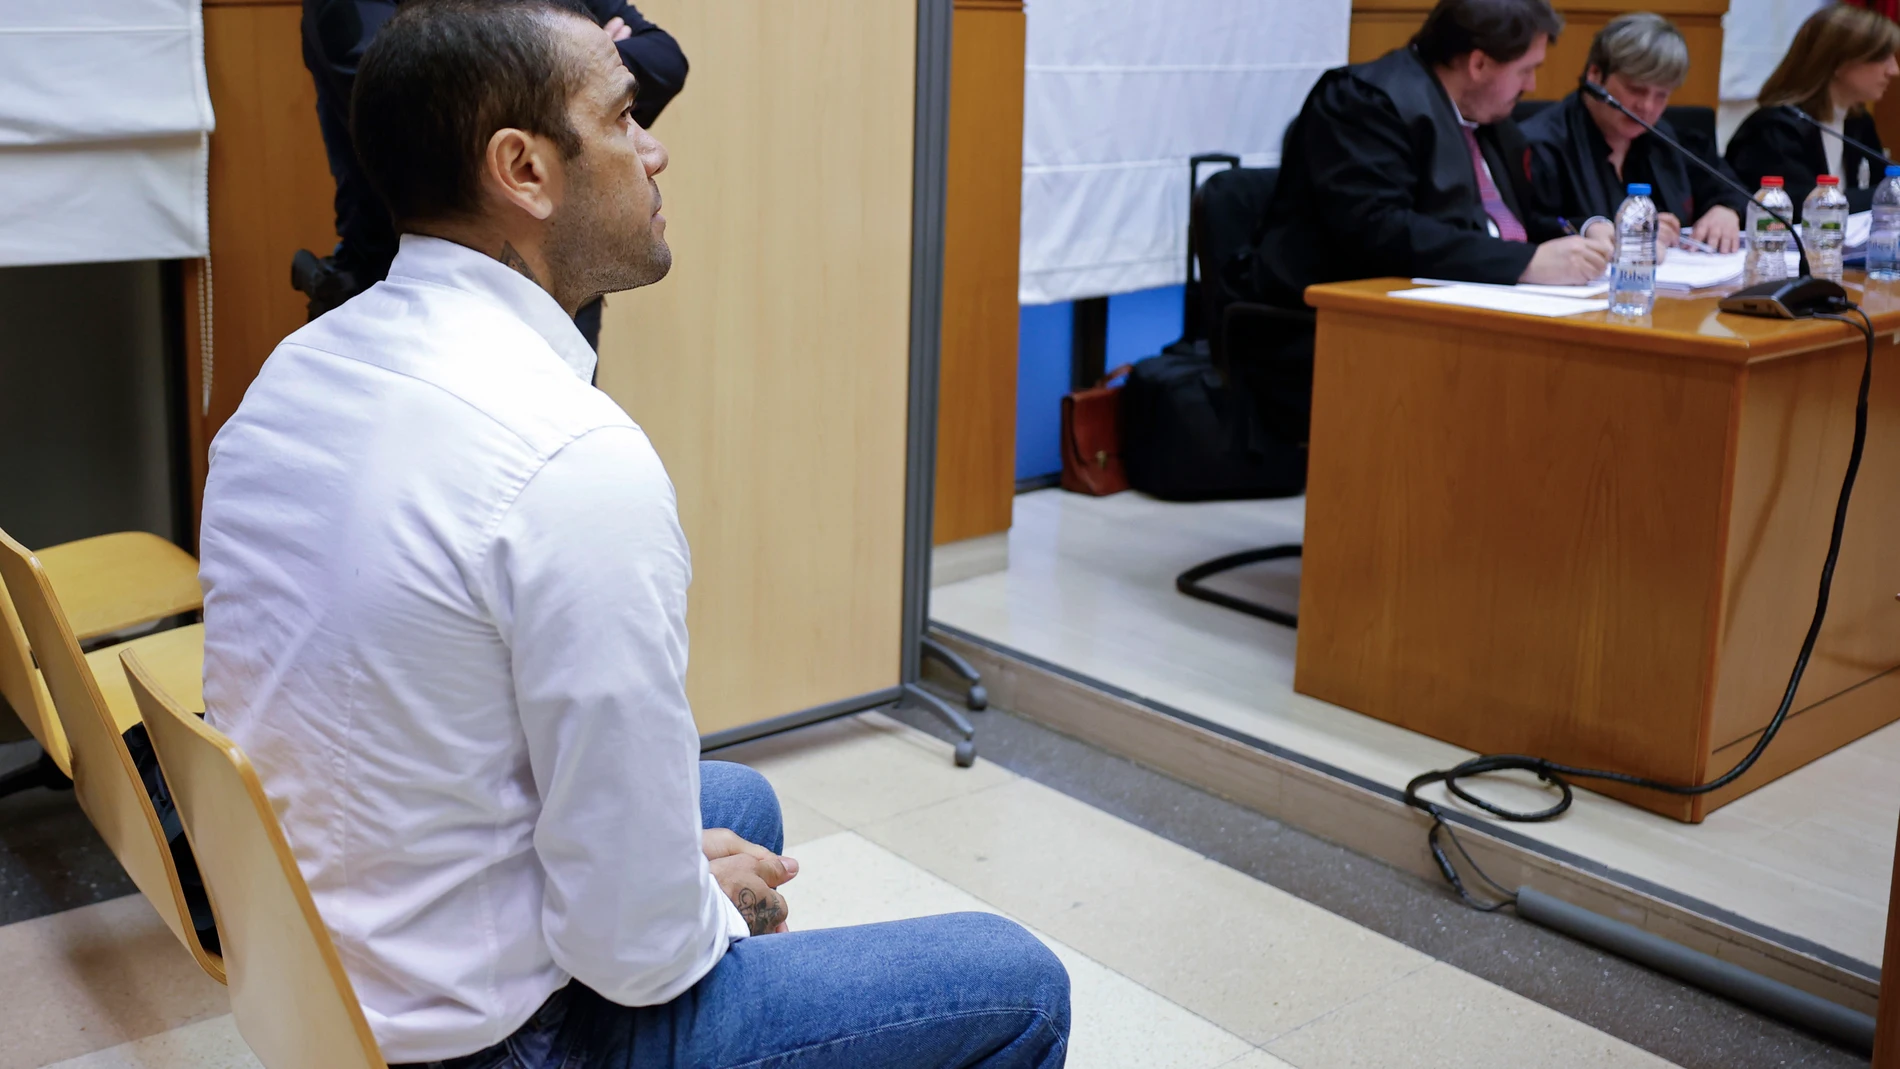 Brazilian soccer star Dani Alves sits during his trial in Barcelona, Spain, Monday, Feb. 5, 2024. Dani Alves goes on trial Monday a year after he allegedly sexually assaulted a young woman at a Barcelona nightclub. The 40-year-old Alves is accused of sexually assaulting the woman on the night of Dec. 30, 2022. He denies any wrongdoing(Alberto Estevez/Pool Photo via AP)